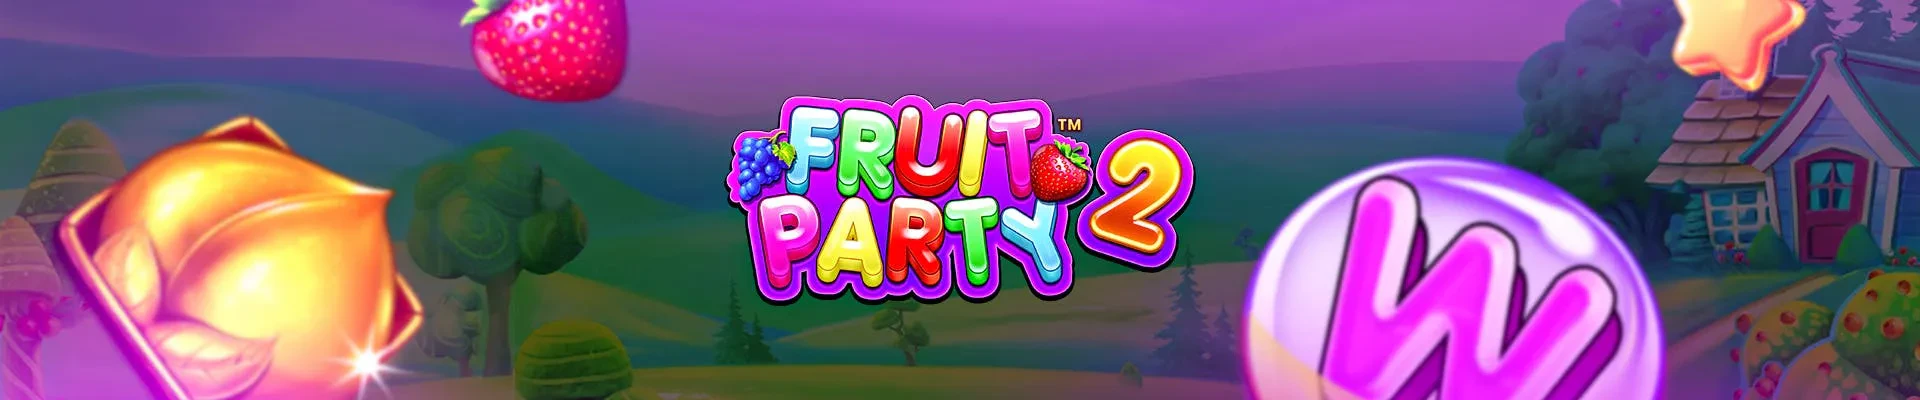 Fruit Party 2 header